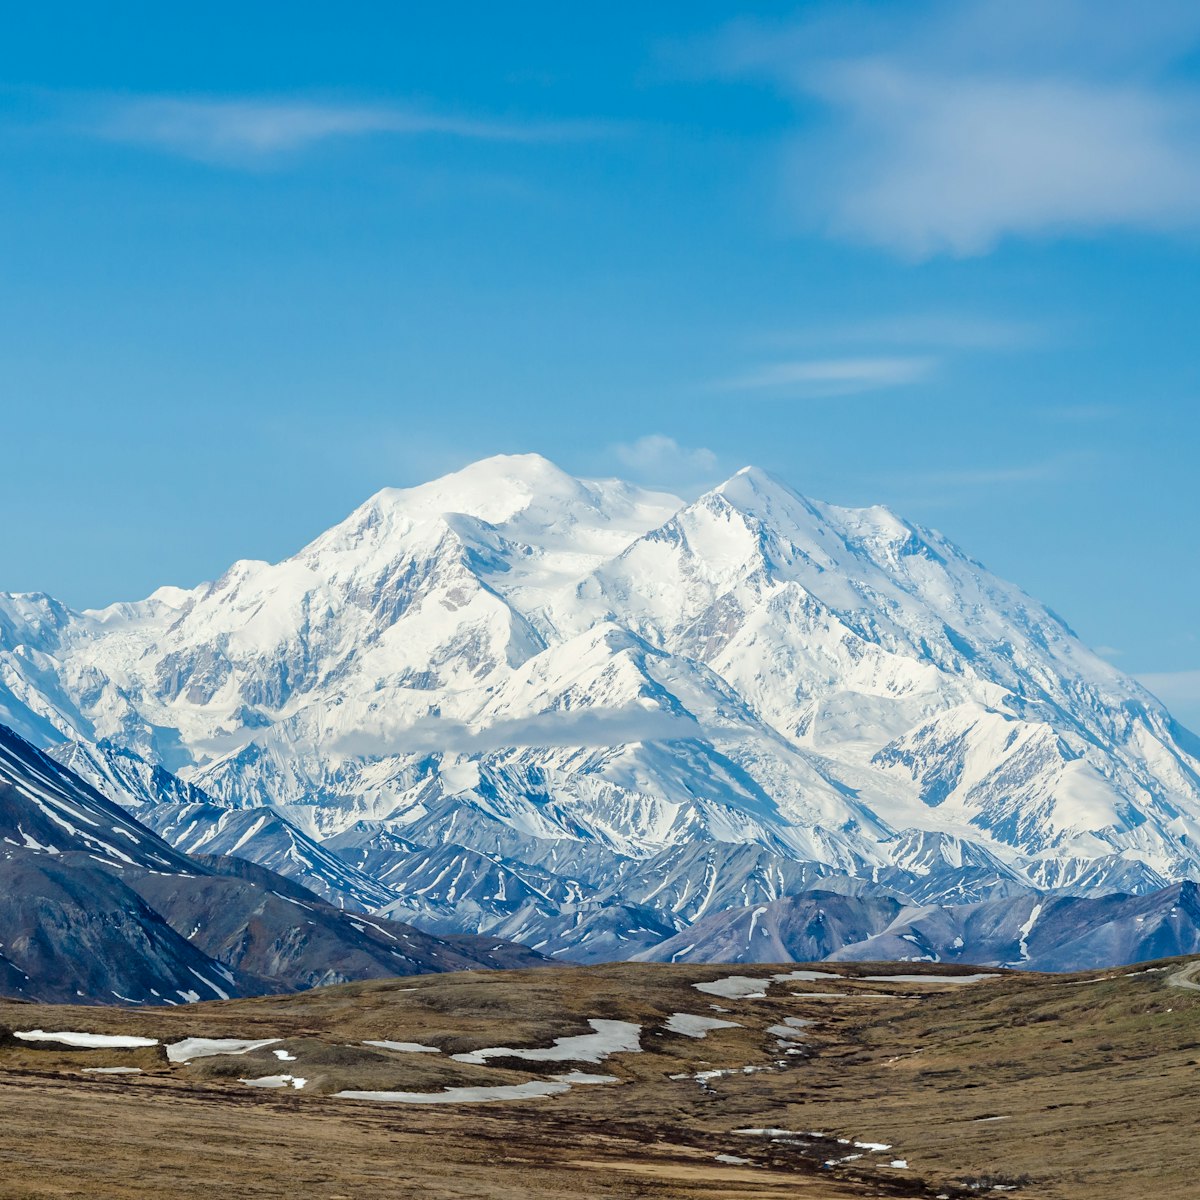 DENALI NATIONAL PARK, ALASKA, USA - JUNE 9 2013: Mt McKinley on a clear day on June 9 2013 in Alaska.  Mt McKinley is the highest mountain in North America and on August 28 2015 was renamed to Denali.
389540554
outdoor, snowy, clear, natural, park, national, day, dramatic, glacier, summer, tundra, denali, range, mckinley, mt, blue, wilderness, mountain, sky, scenic, snow, wild, nature, pretty, alaska, landscape